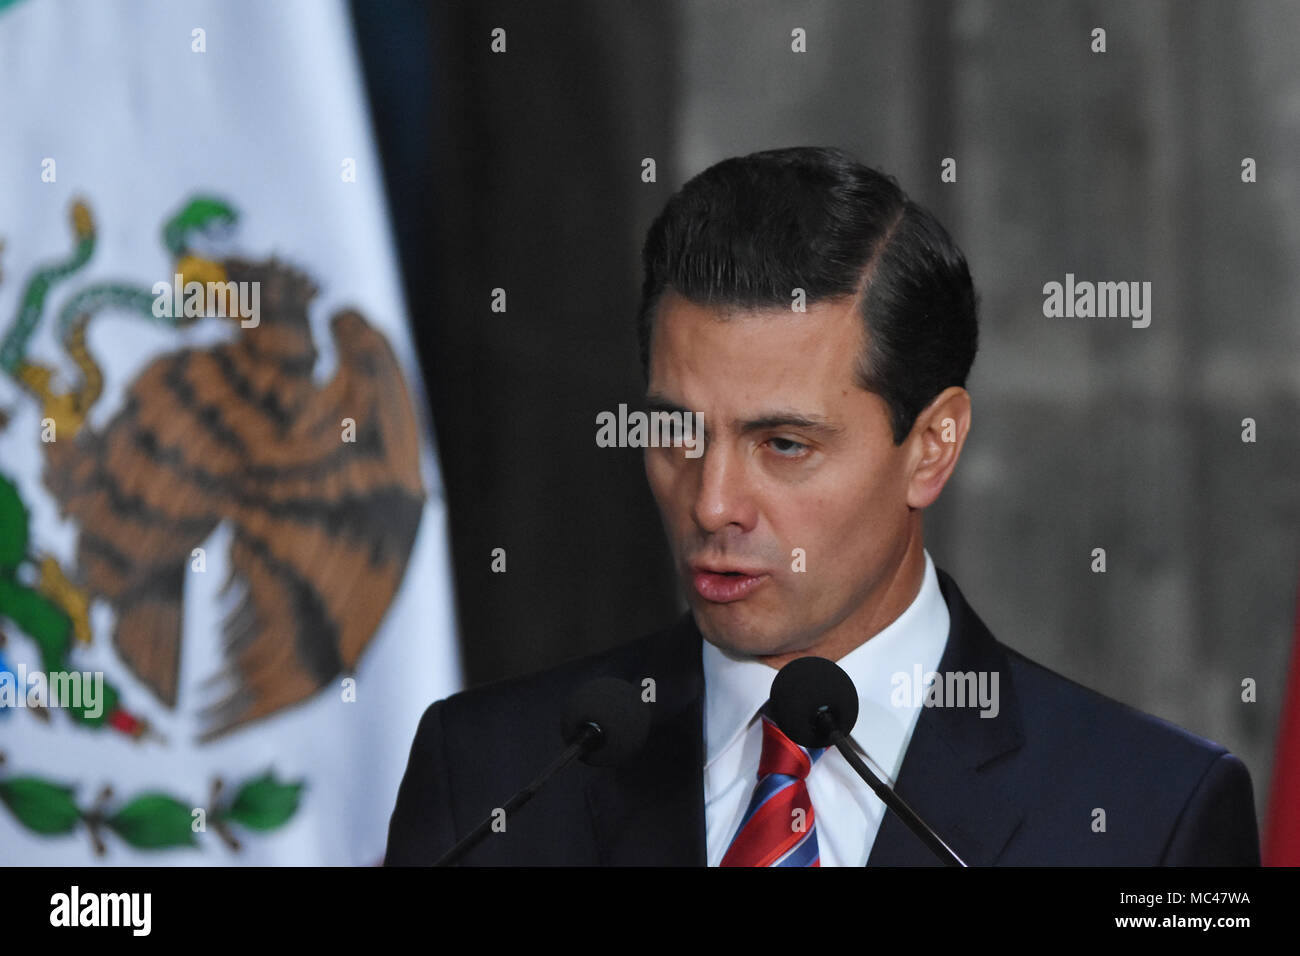 Mexico City, Mexico. 12th April, 2018. Mexico's President Enrique Pena Nieto seen speaking during the visit of Prime Minister of Norway Erna Solberg at a press conference on the theme of Energy at the National Palace in Mexico City. Credit: SOPA Images Limited/Alamy Live News Stock Photo